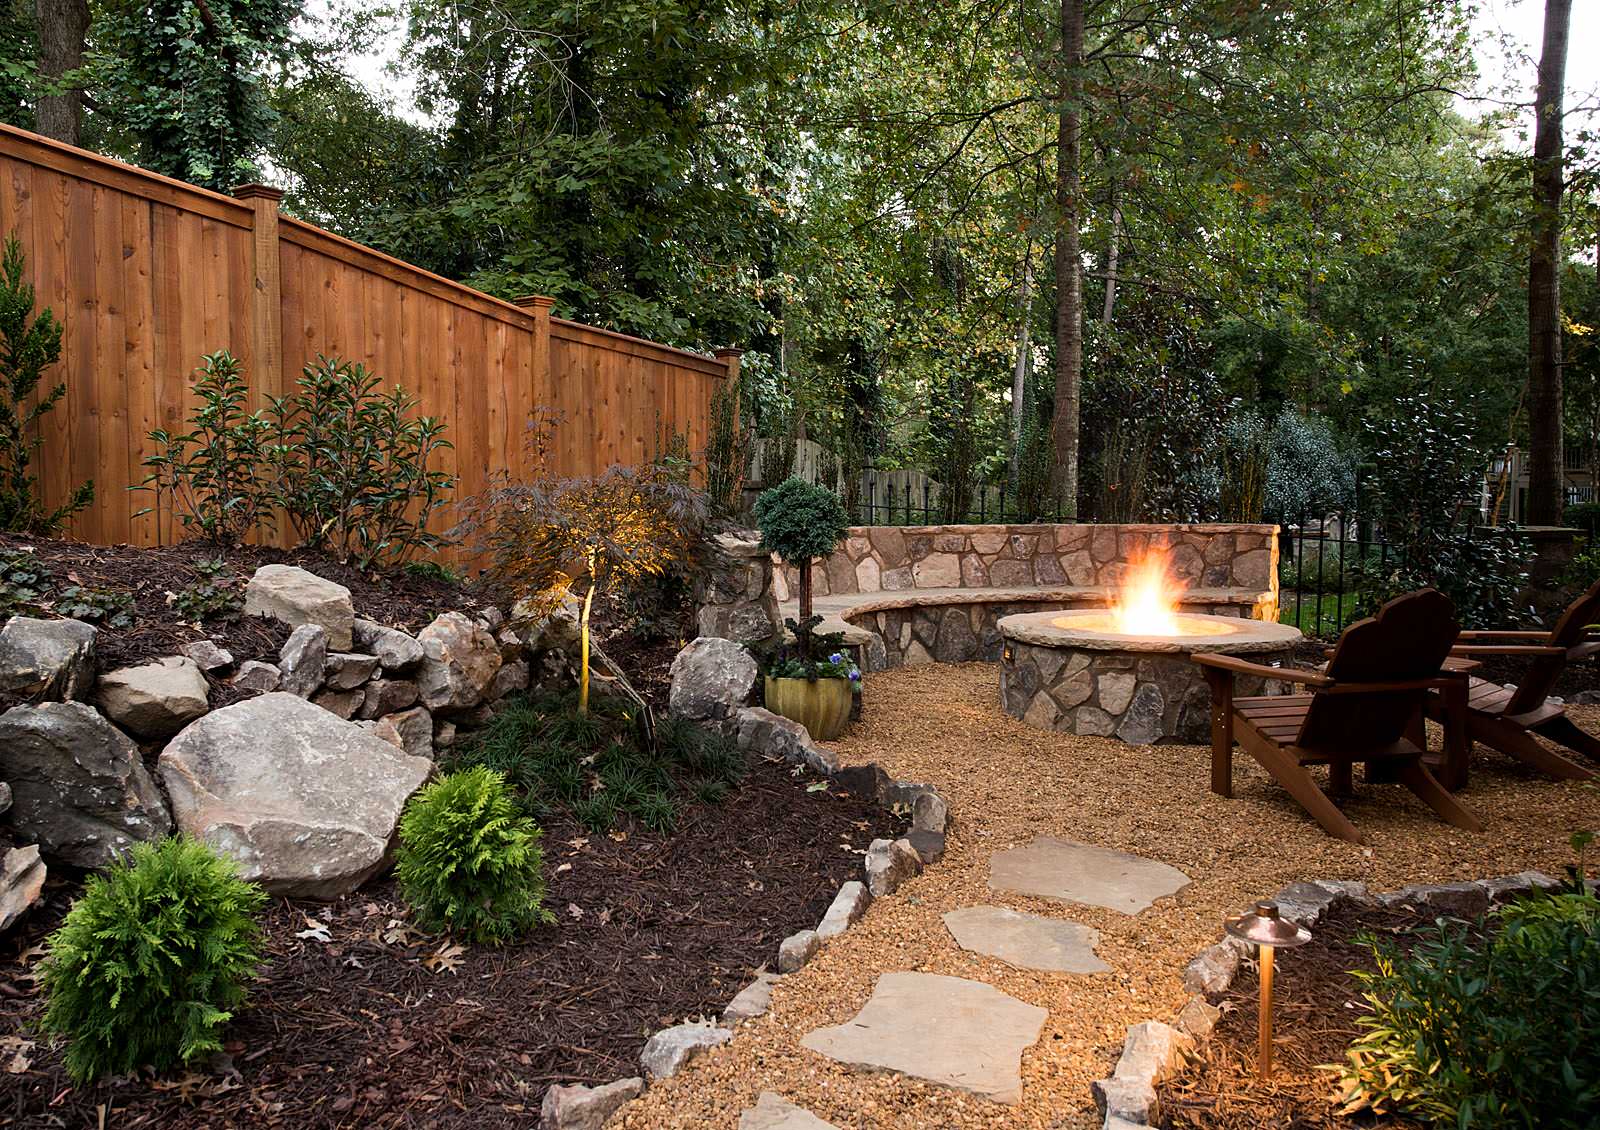 Rustic Landscaping With A Fire Pit, Fire Pit Landscaping Images